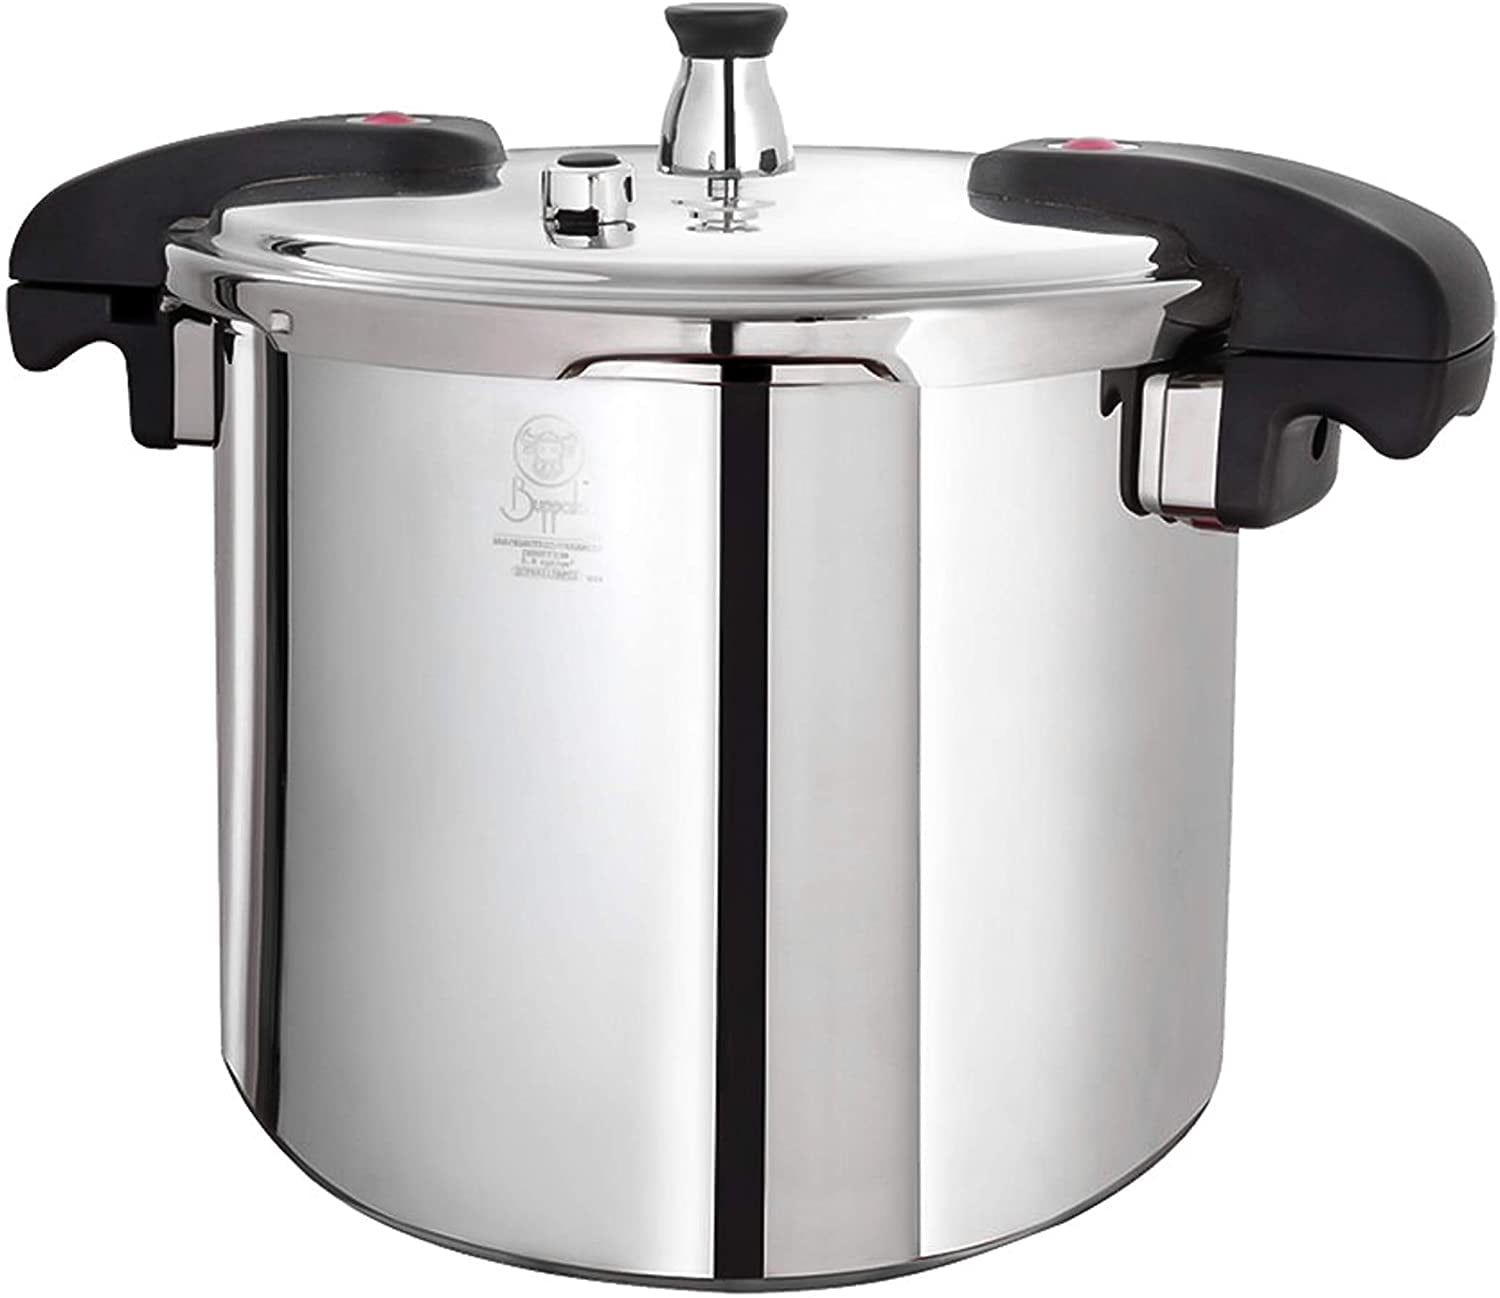 Commercial Very Large Pressure Cooker,Stainless Steel Multi Explosion Proof Large Steamer Cooking Pressure canners,large Capacities 15L Litre Be